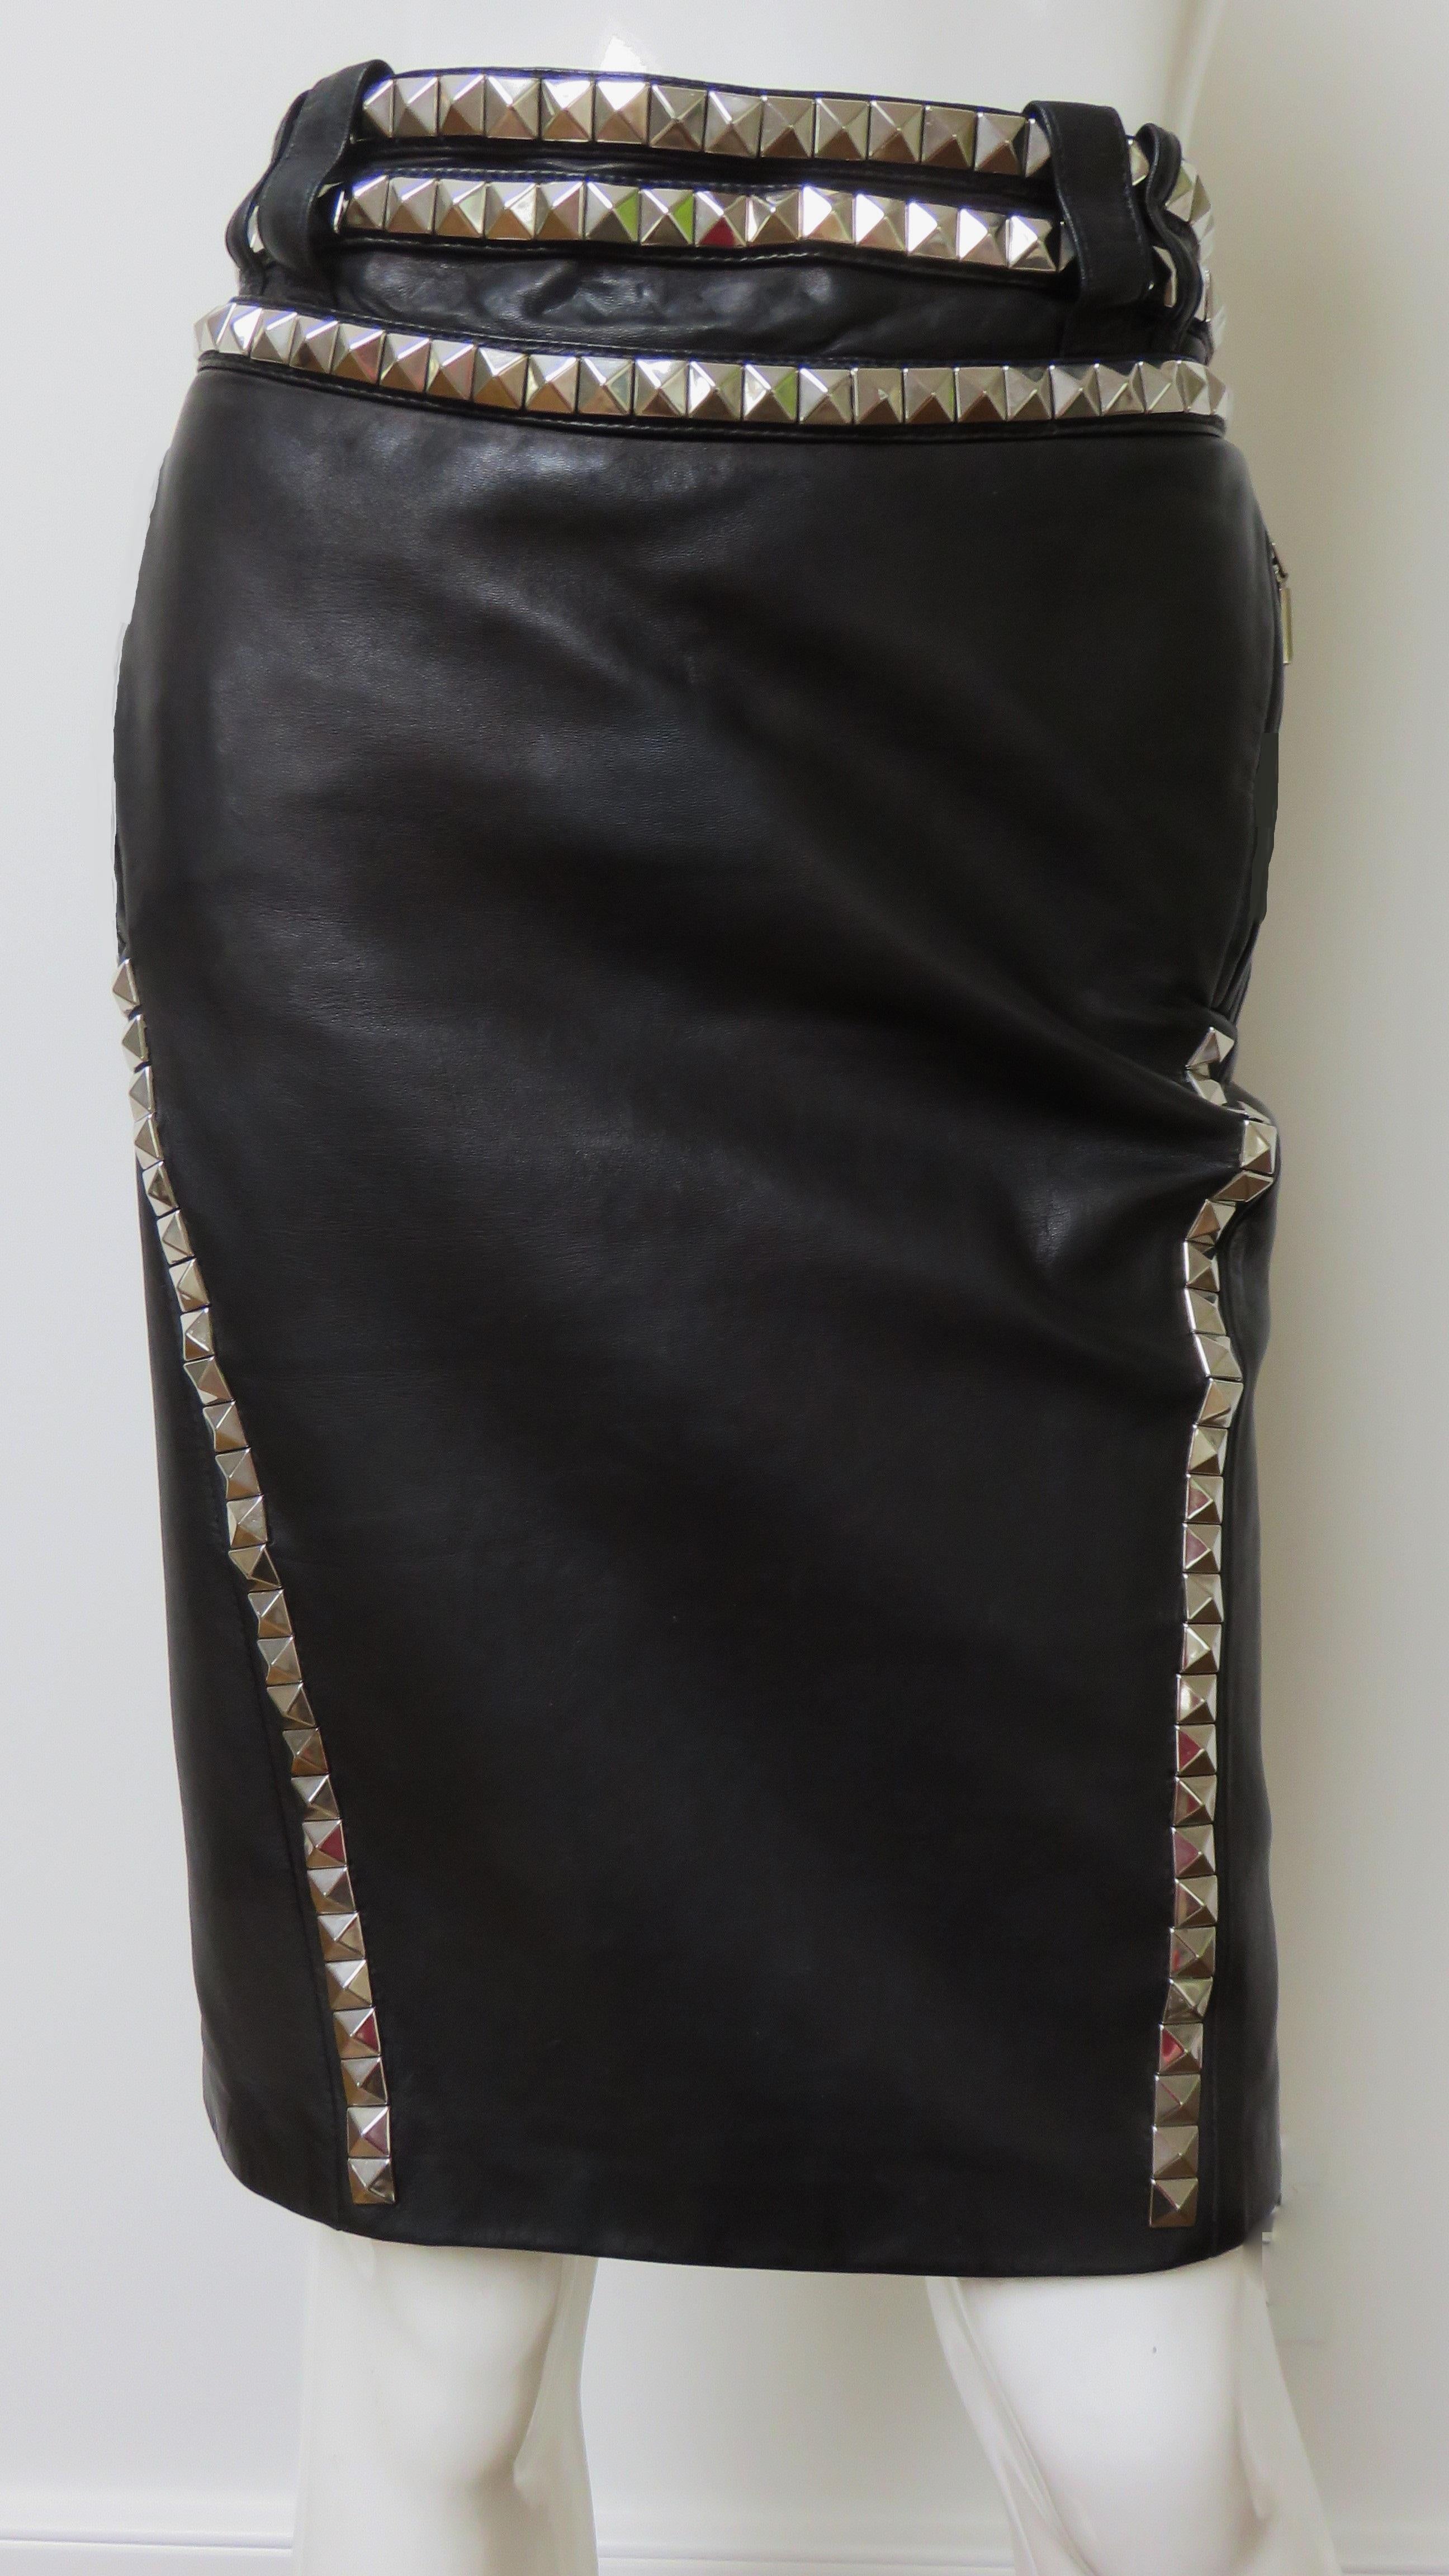 Verace Leather Skirt with Studs and Buckle Waist  In Good Condition For Sale In Water Mill, NY